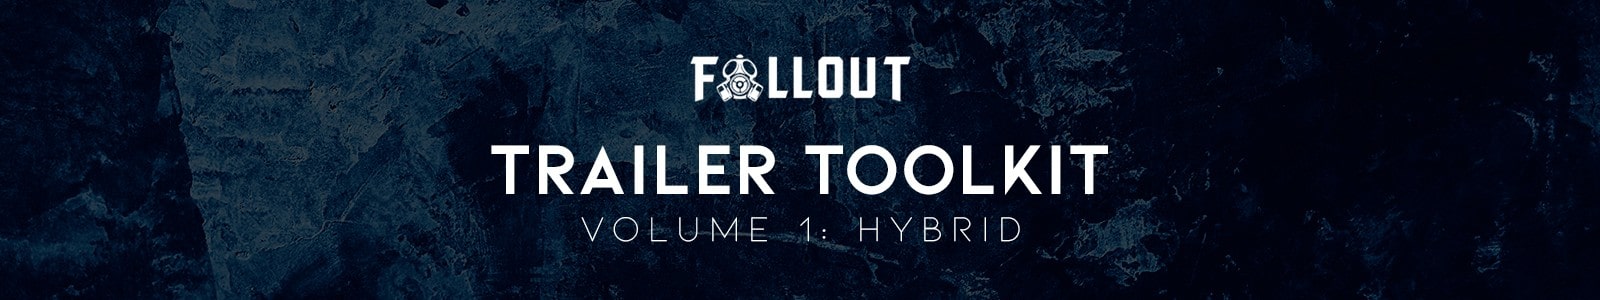 Fallout Music Group Trailer Toolkit Vol. 1: Hybrid